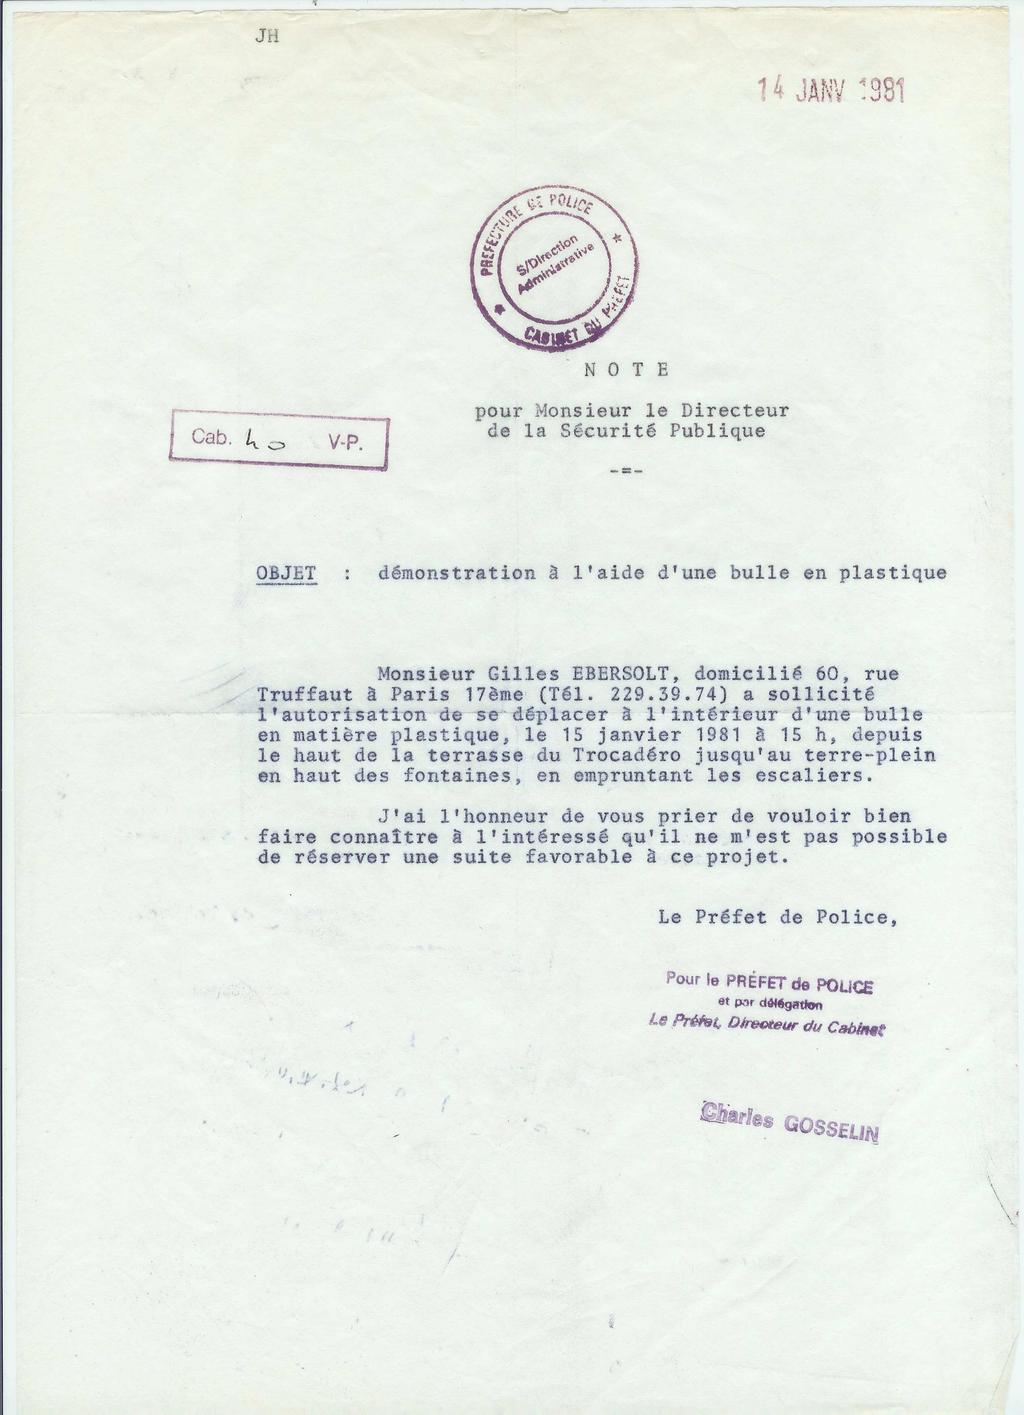 January 1981 : Recognition of the existence of the Ballule by the public authorities.